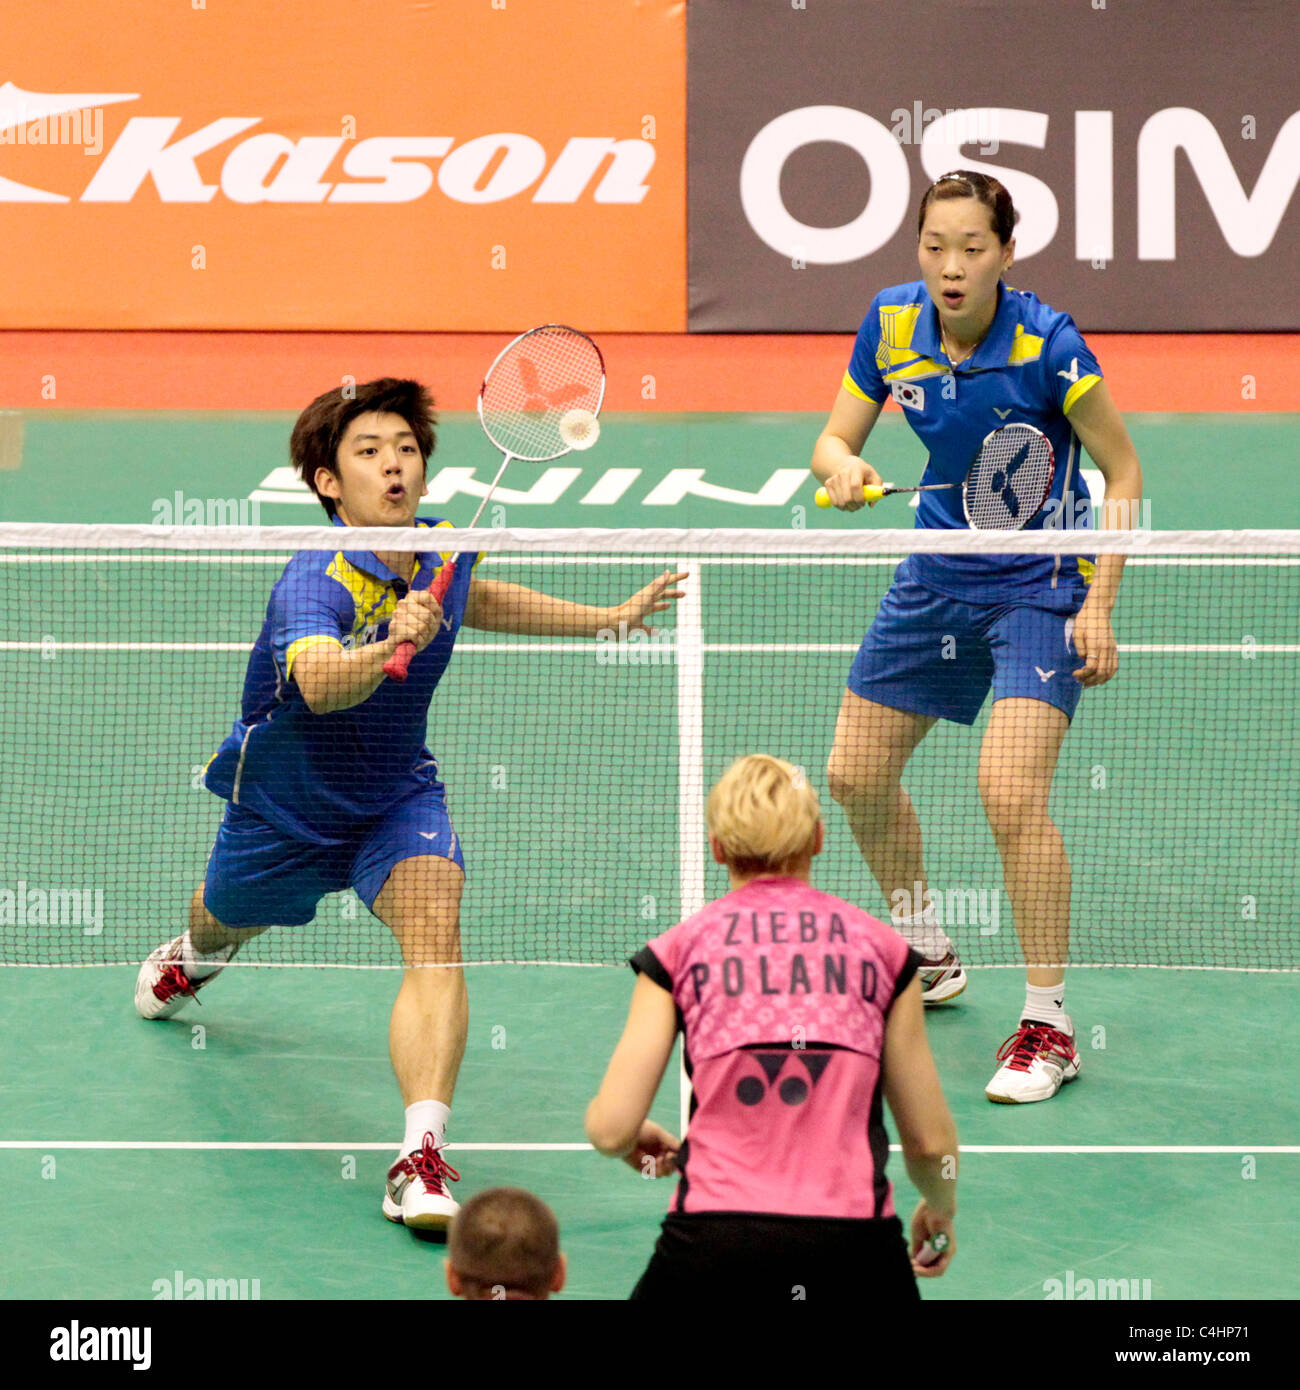 Lee Yong Dae and Ha Jung Eun of Korea during their Mixed Doubles Round 2 match, Li-Ning Singapore Open 2011. Stock Photo